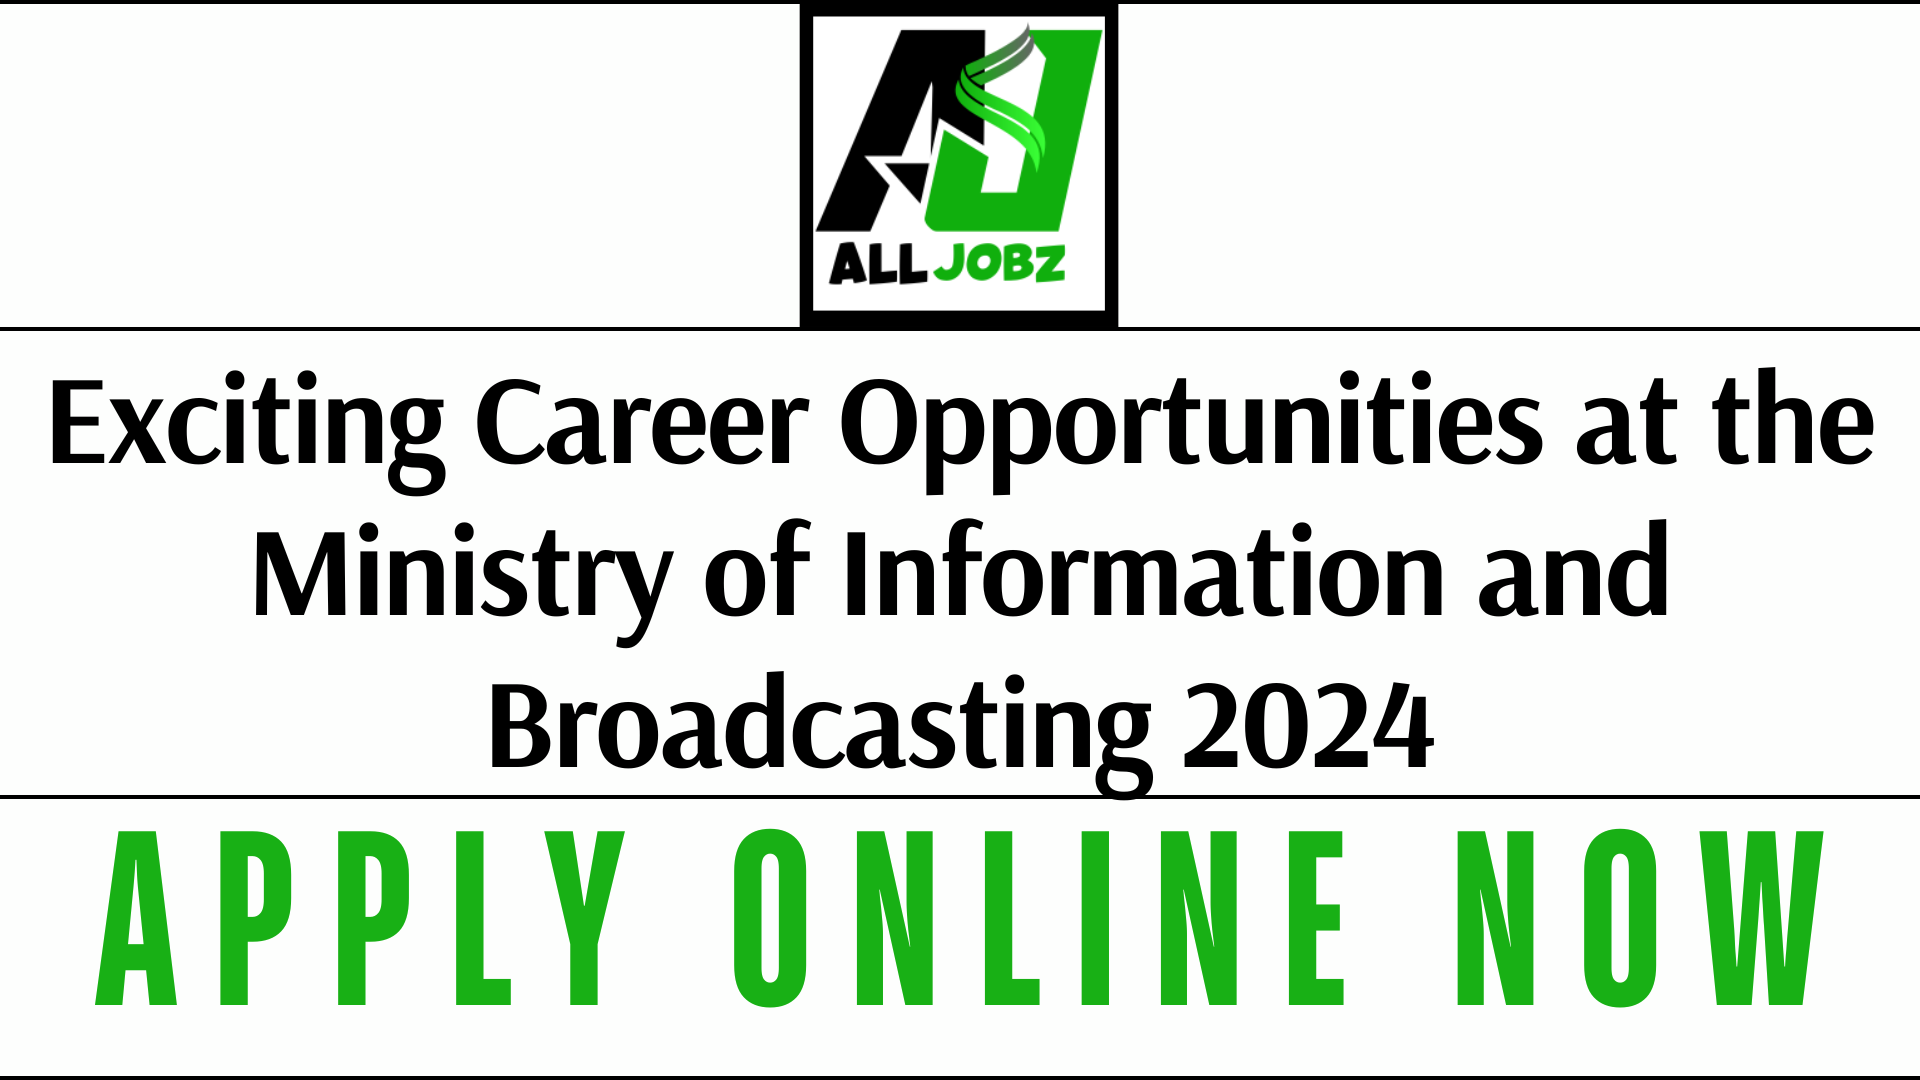 Ministry Of Information And Broadcasting Jobs Online Apply, Ministry Of Information And Broadcasting Pakistan Jobs, Ministry Of Information And Broadcasting Jobs Salary, Current Minister Of Information And Broadcasting Pakistan, Ministry Of Information And Broadcasting Pakistan Address, Current Federal Minister Of Information And Broadcasting, Ministry Of Information And Broadcasting Contact Number, Ministry Of Information And Broadcasting Minister Responsible